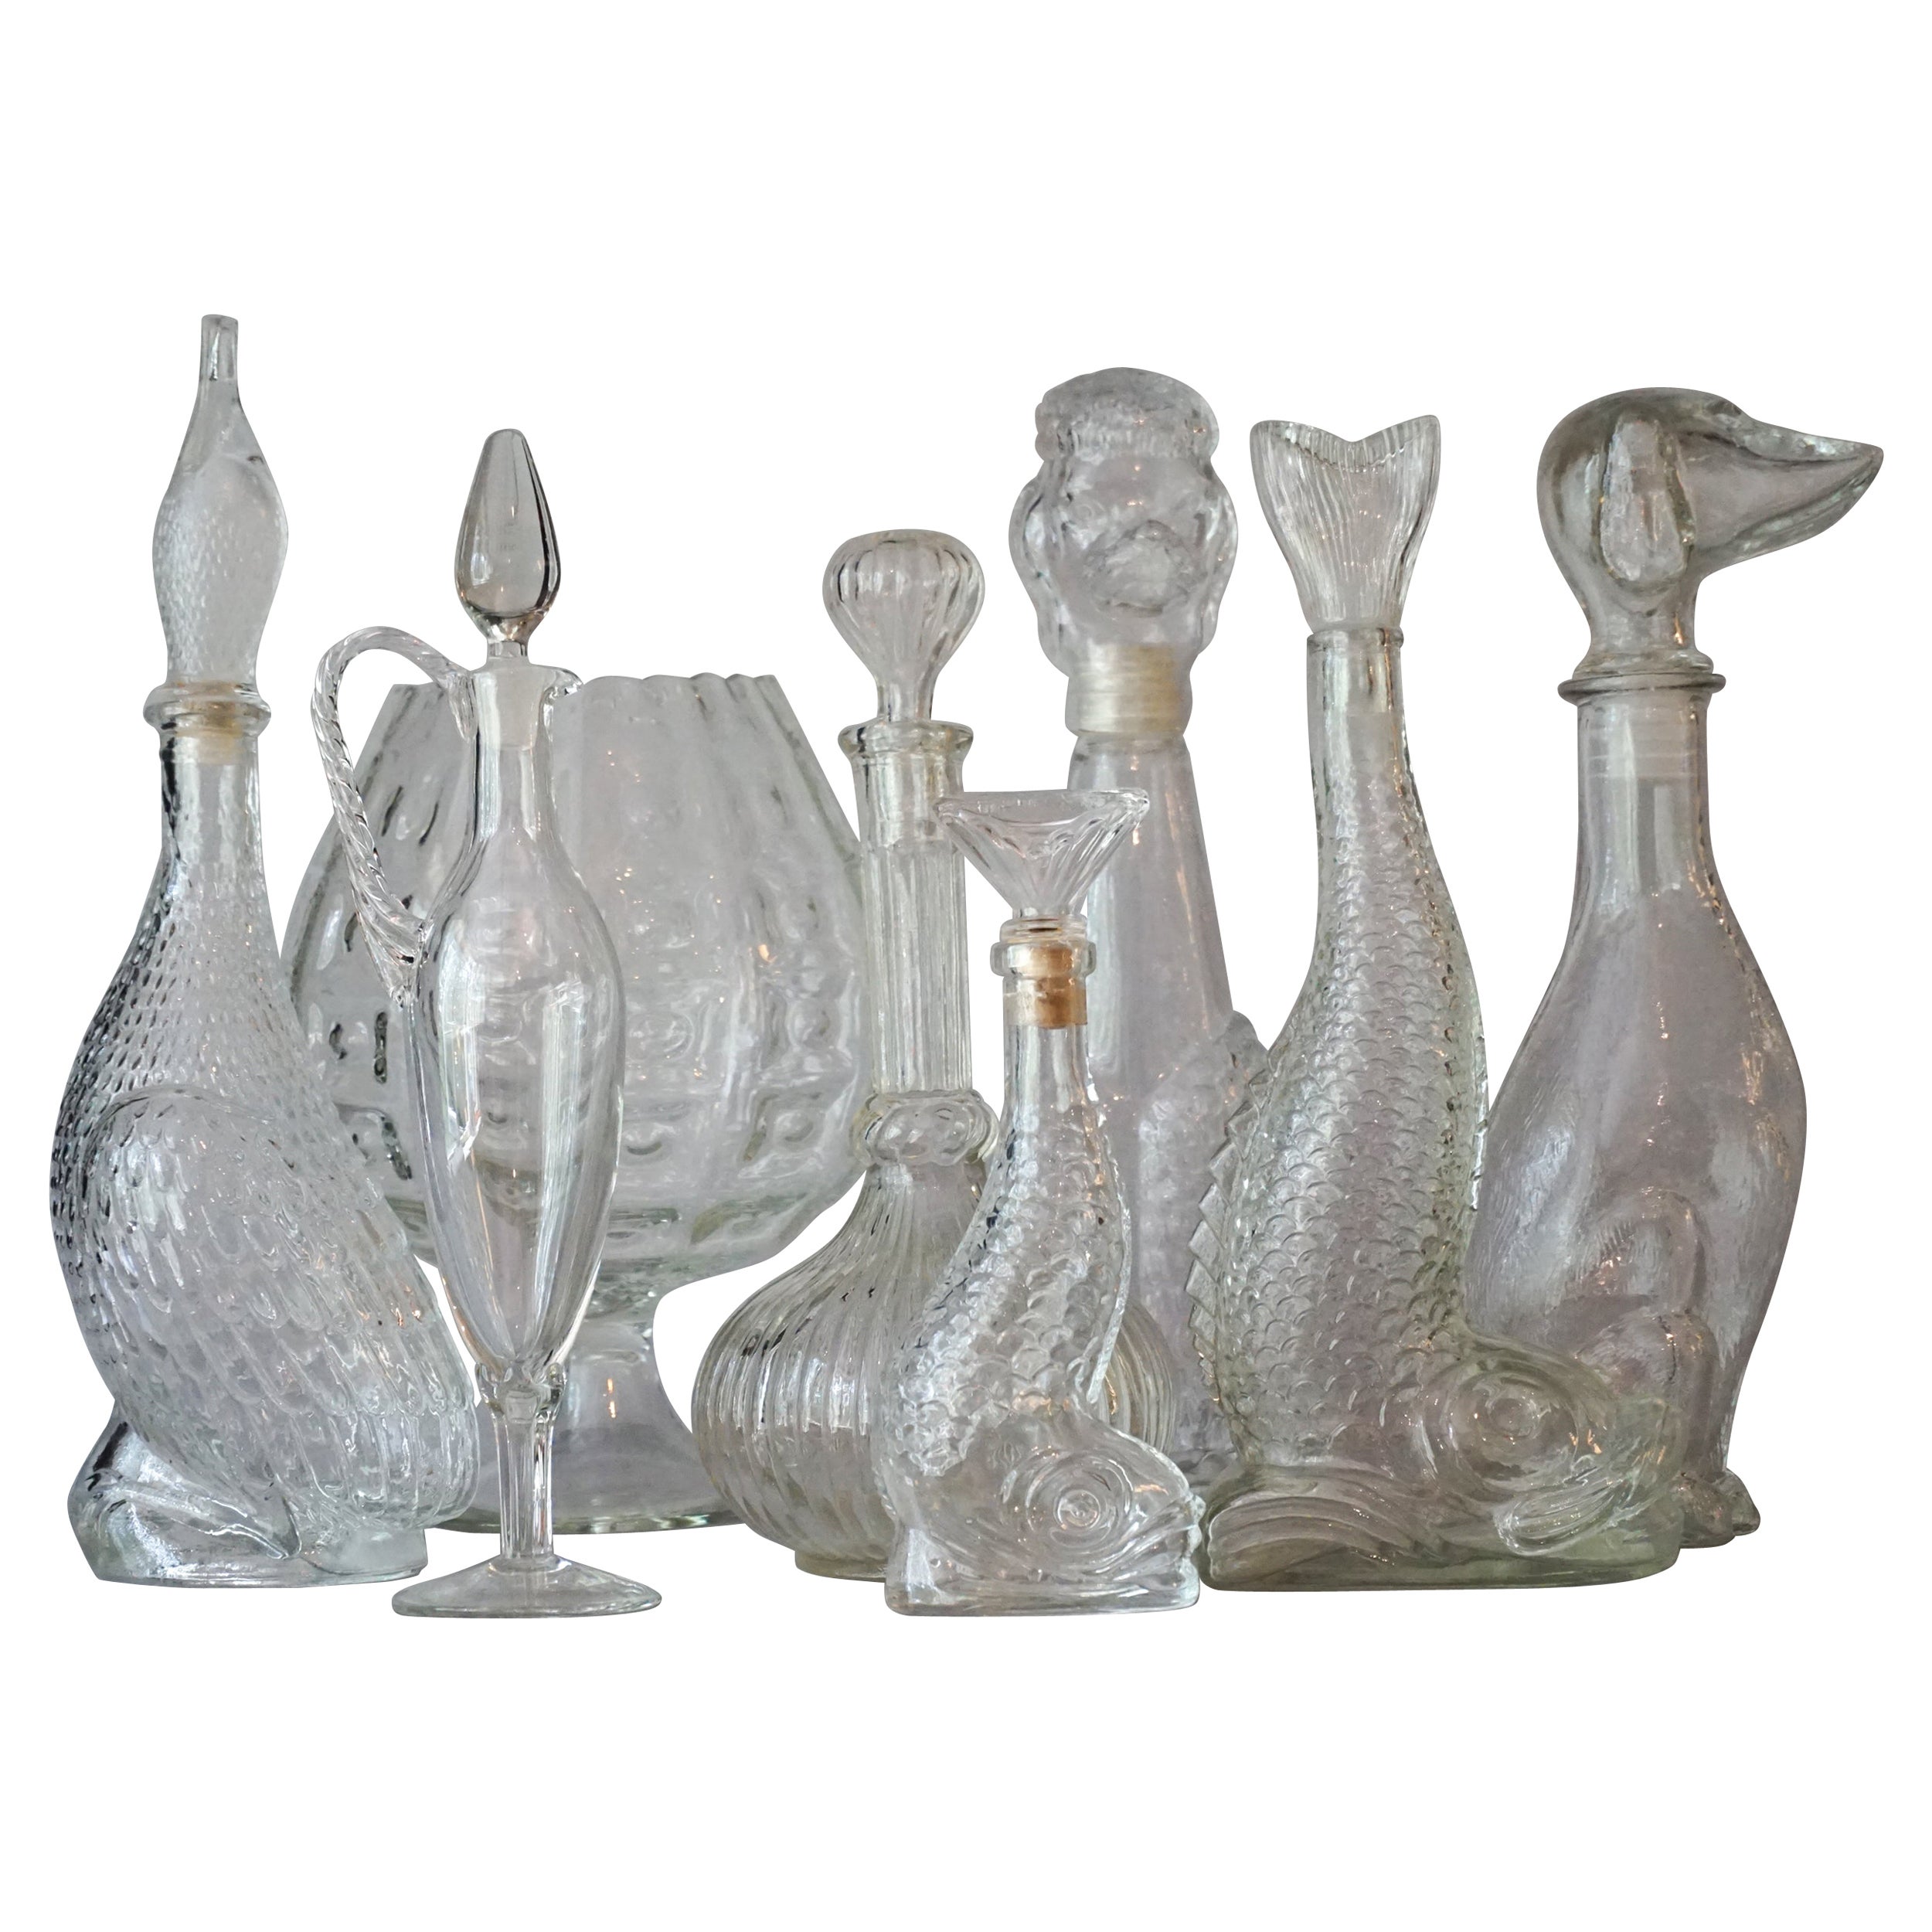 Eight 1960s Clear Glass Italian Empoli Duck Dog Fish Decanters Bottles and Vases